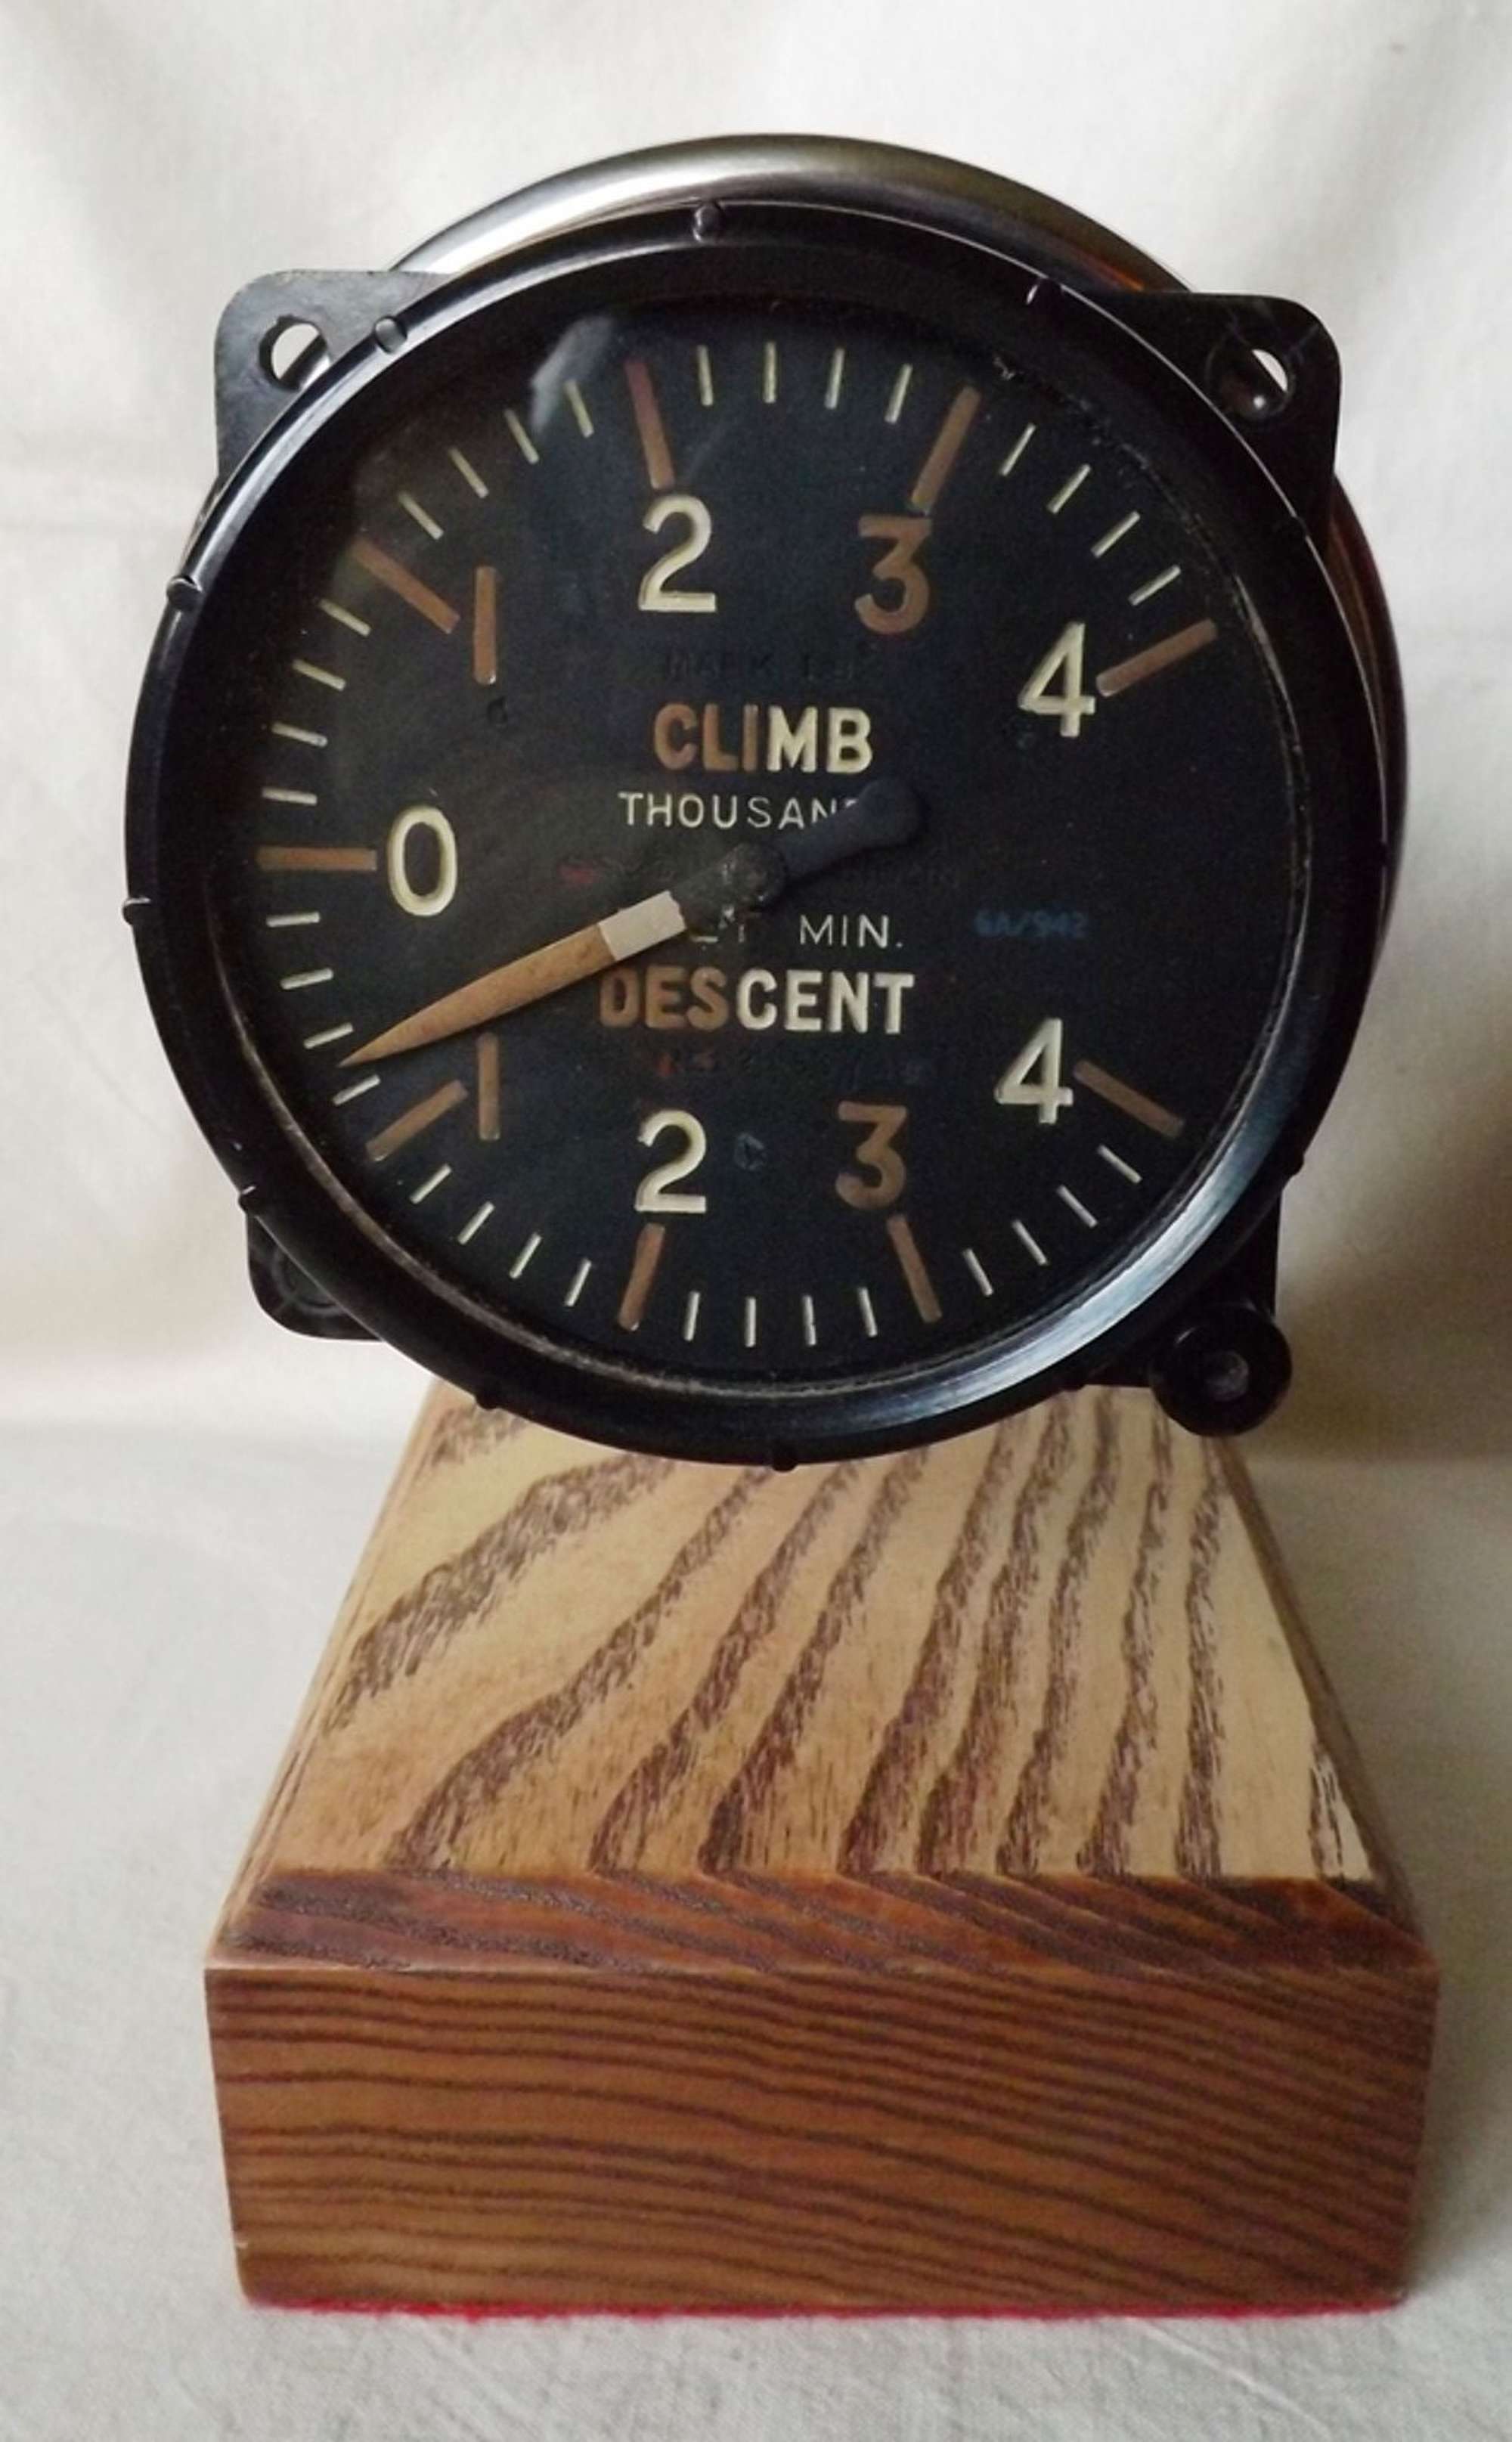 WW2 RAF aircraft Rate of Climb Indicator dated 1940 on display stand